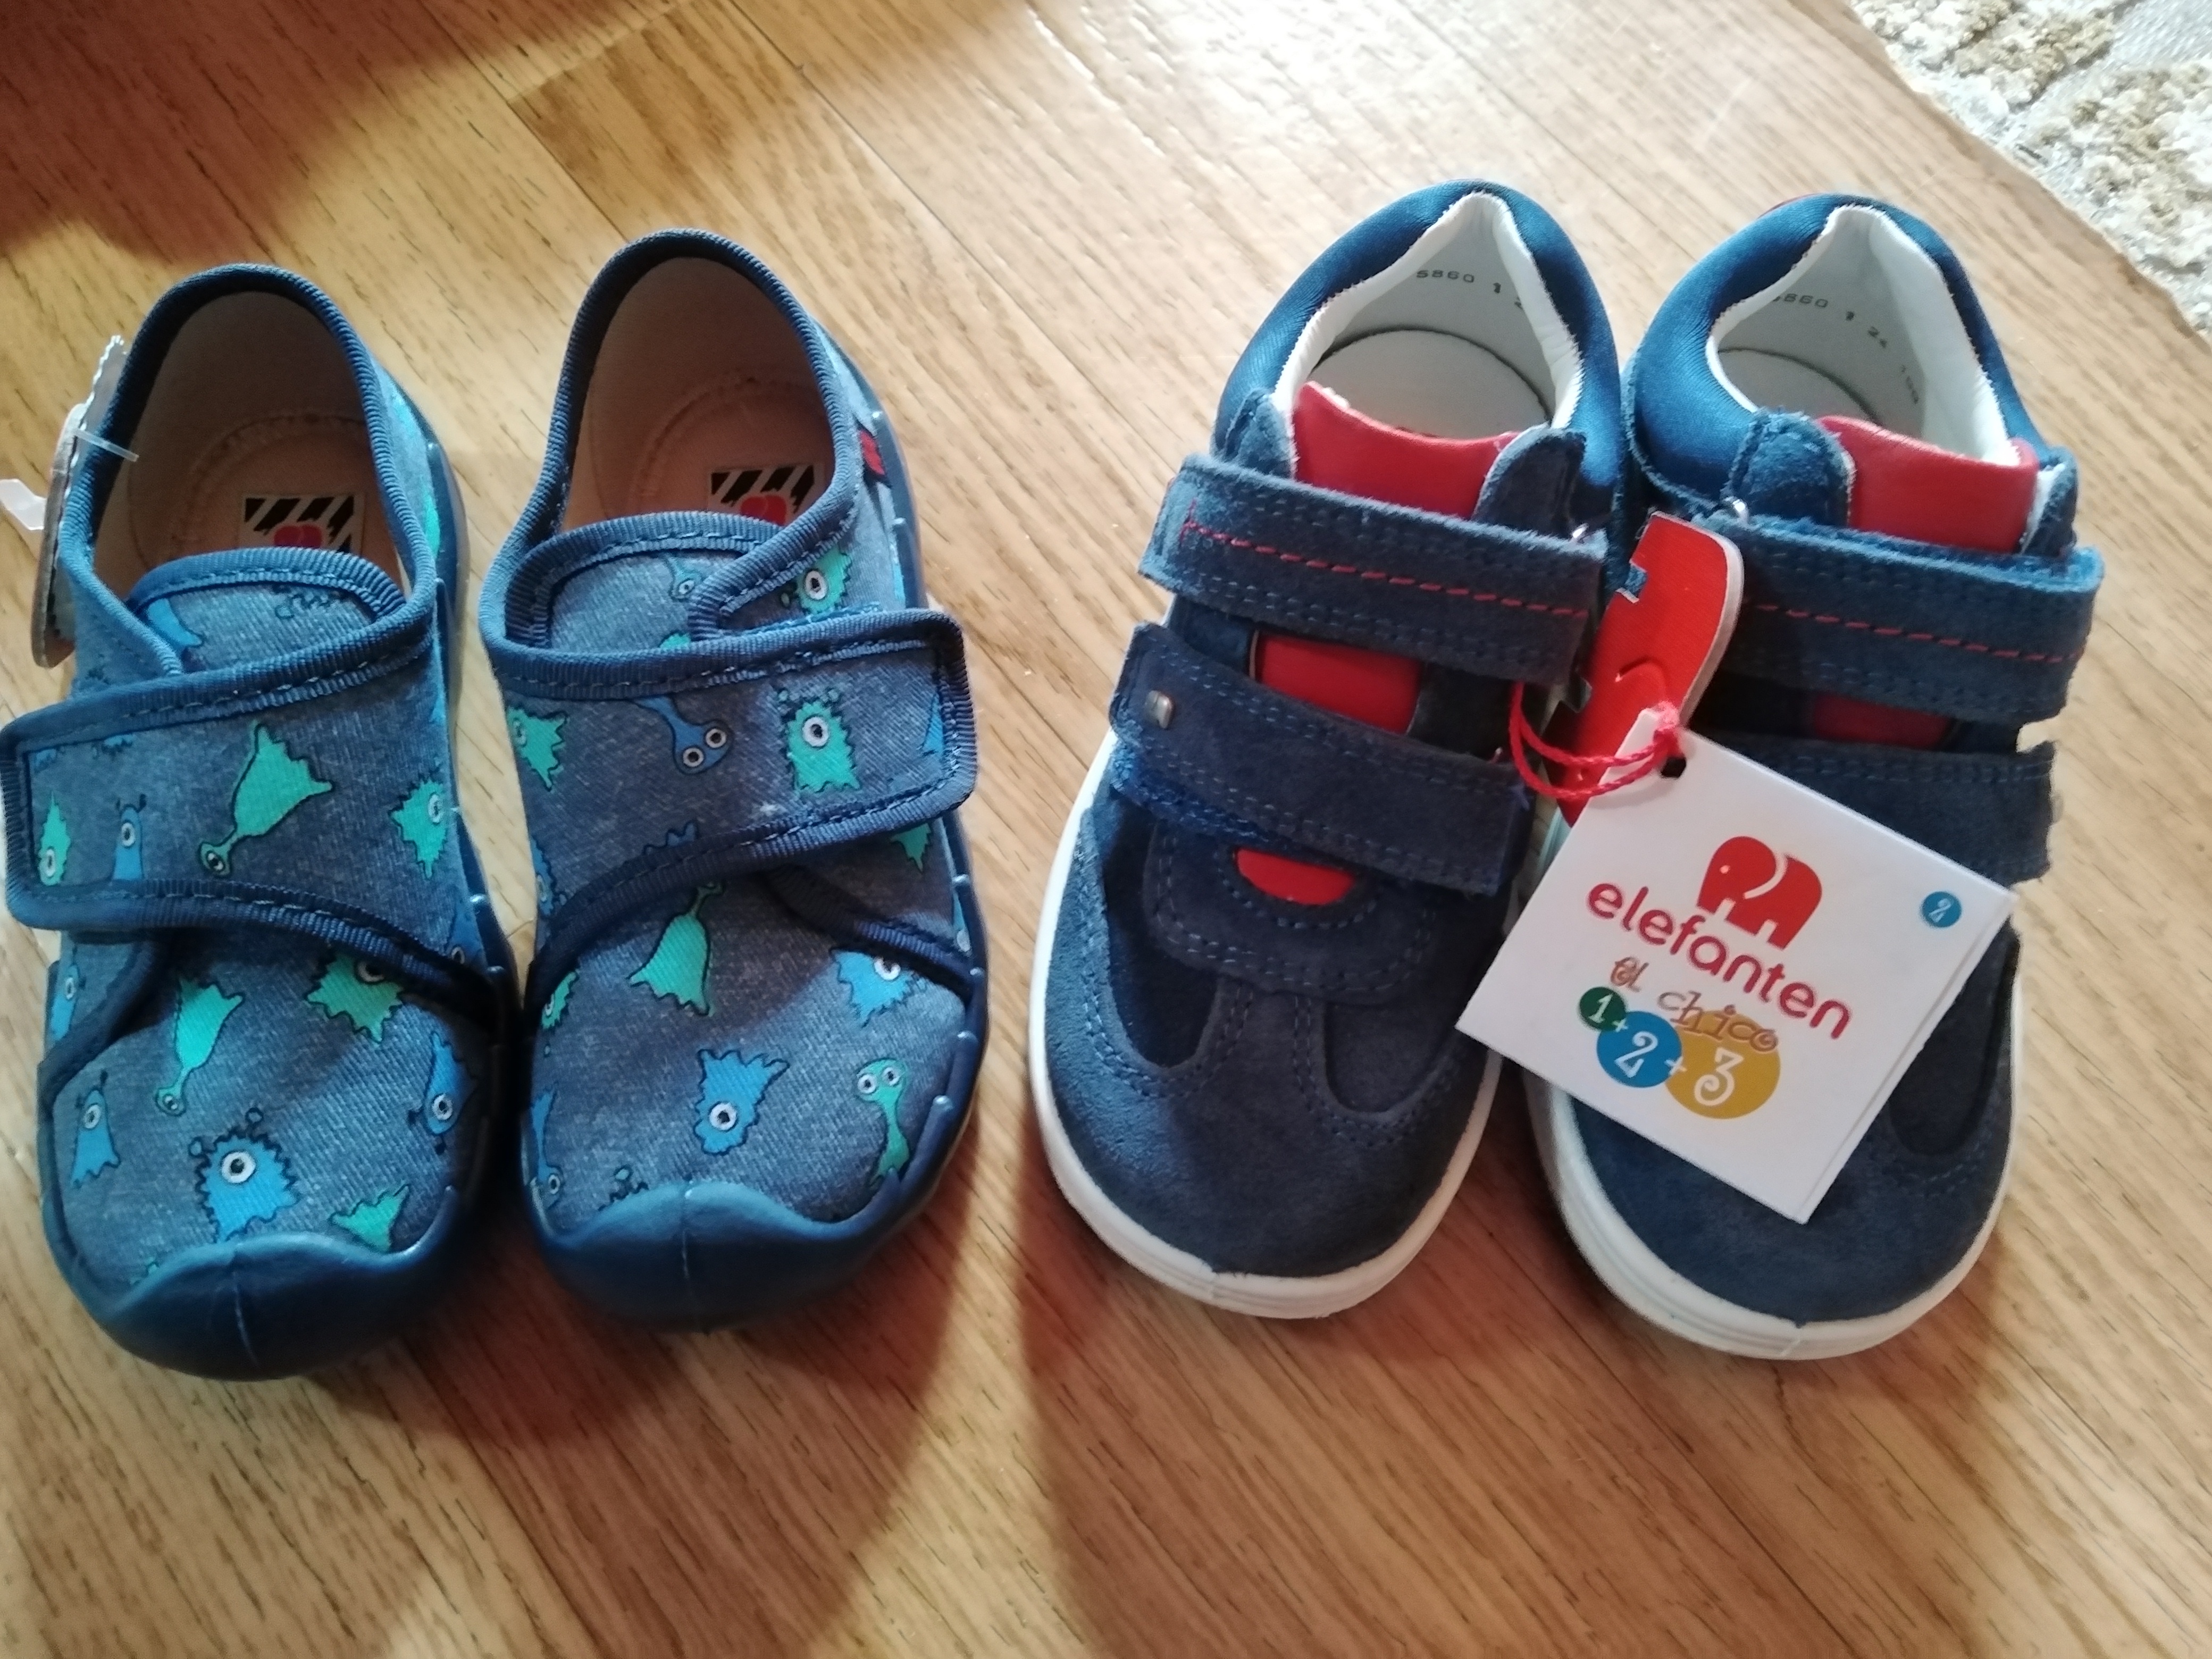 Two pairs of children's shoes.